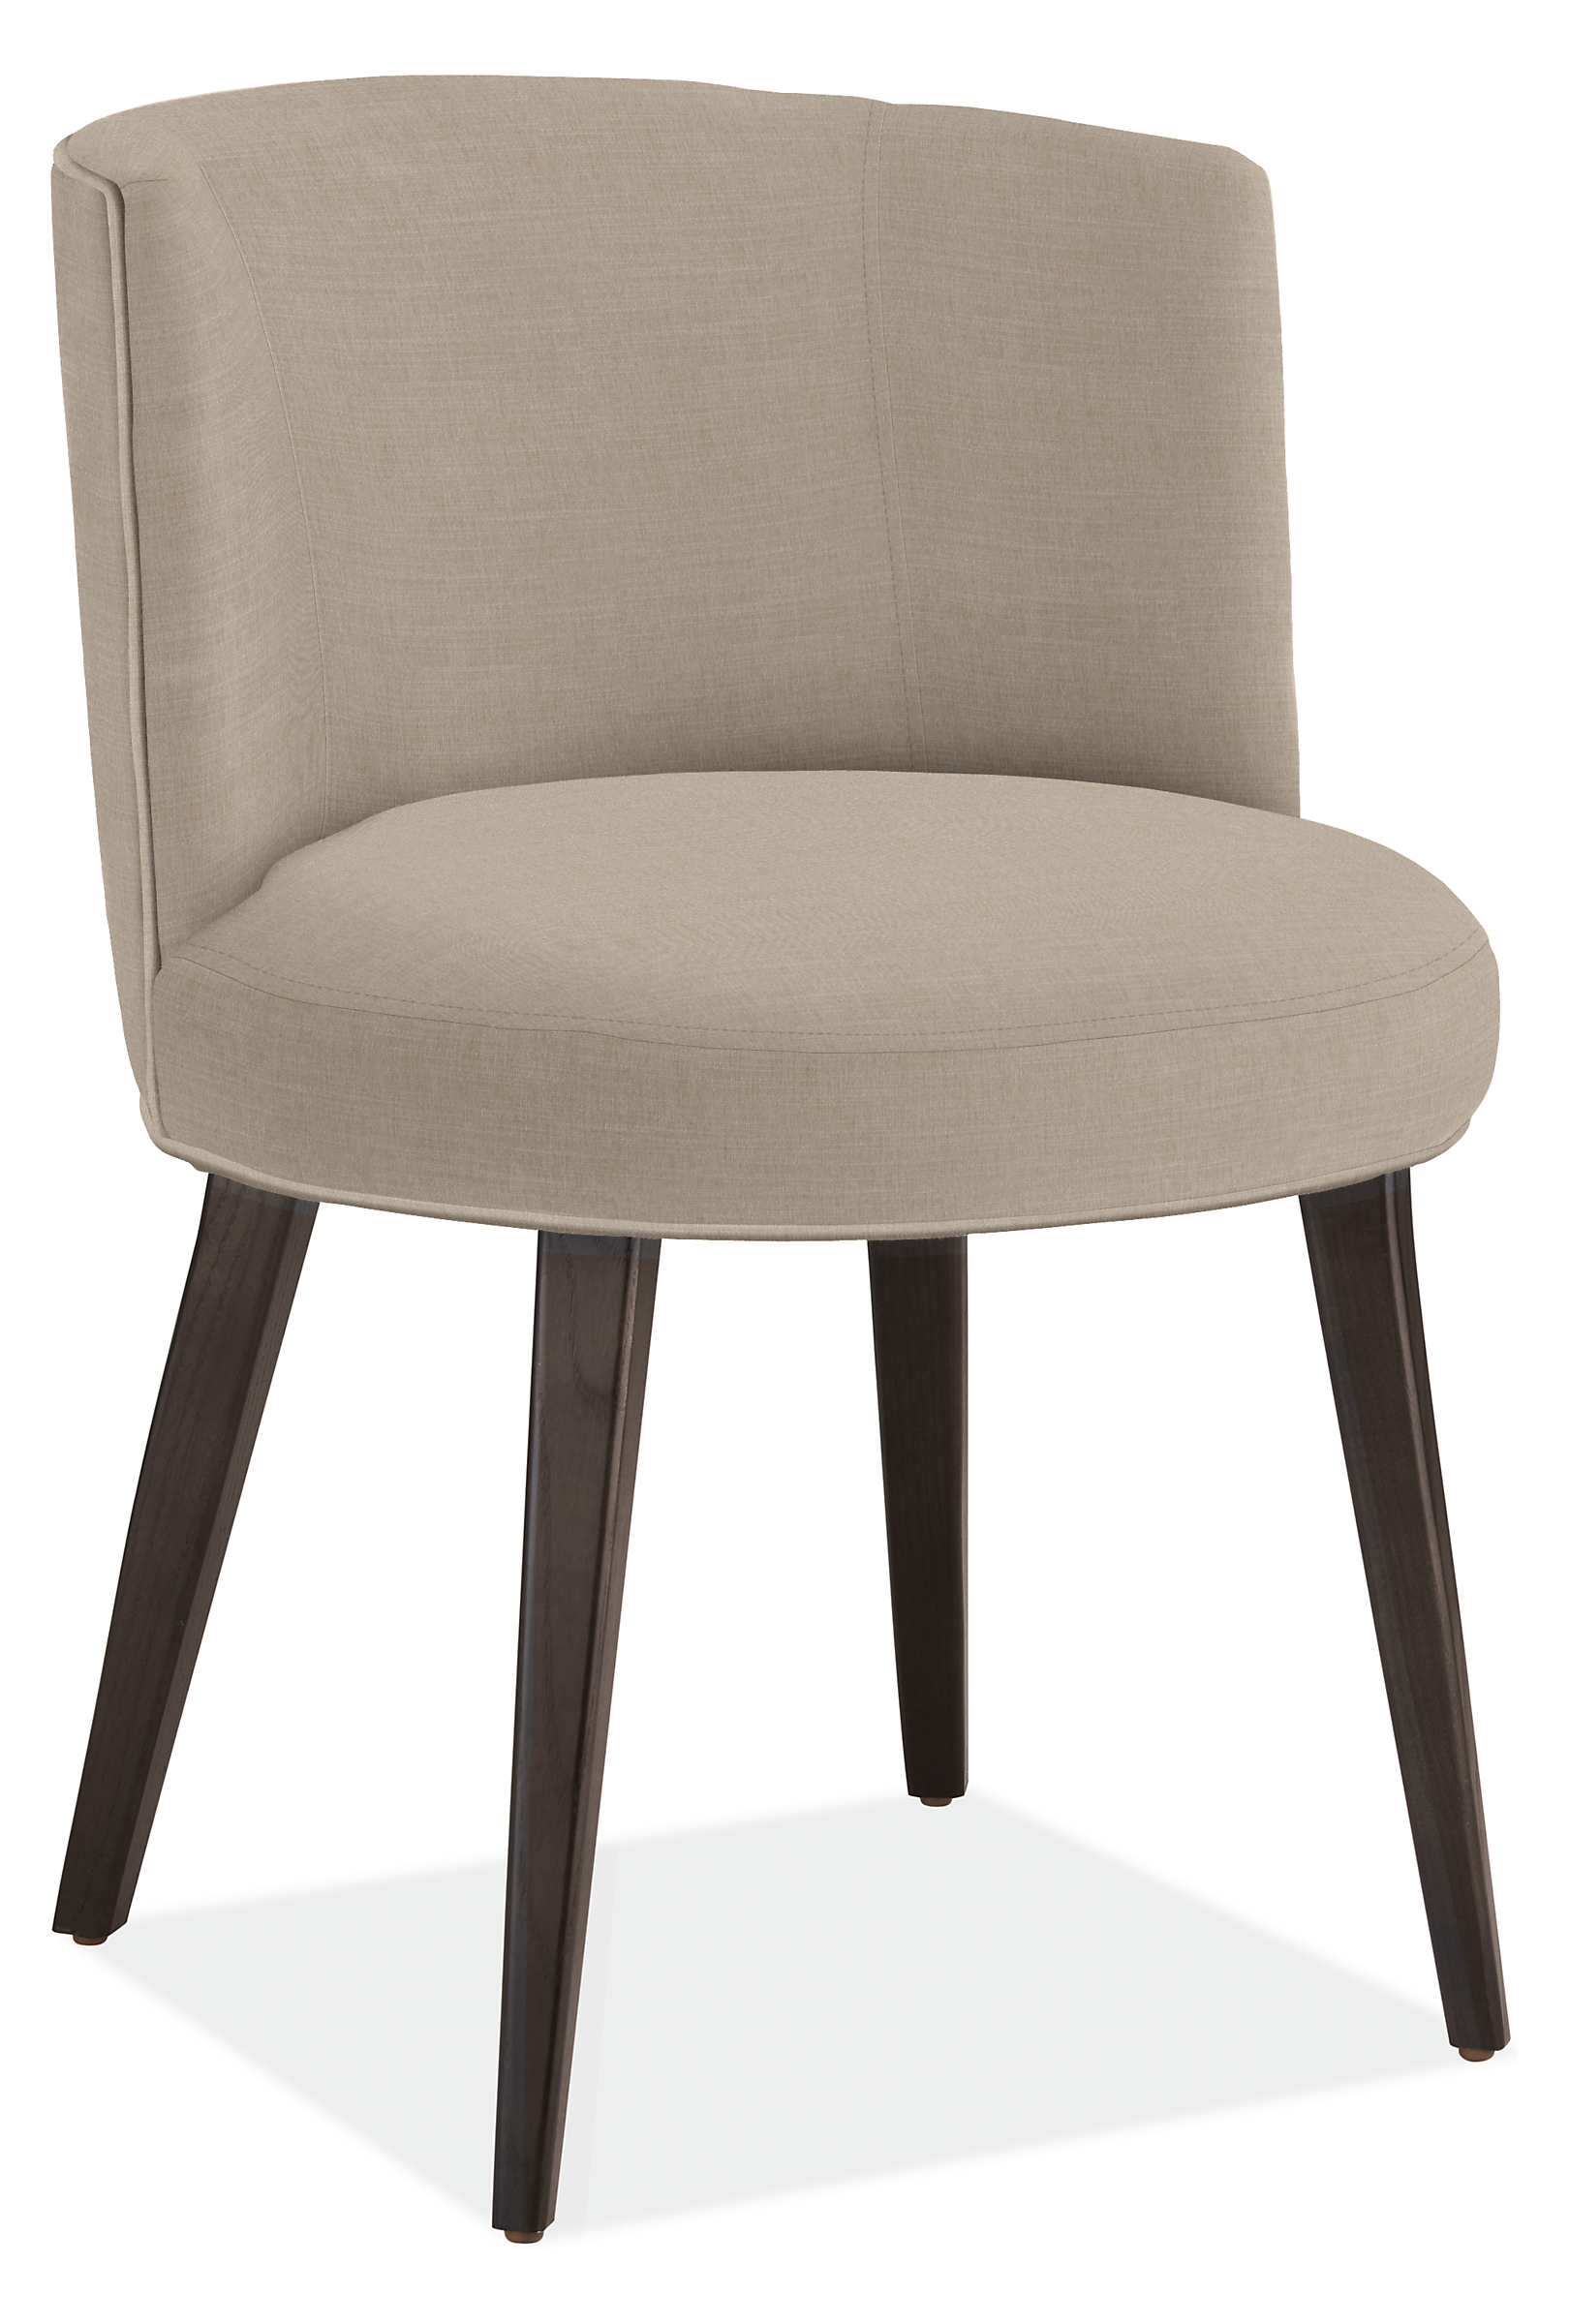 June Side Chair in Mori Oatmeal with Charcoal Legs